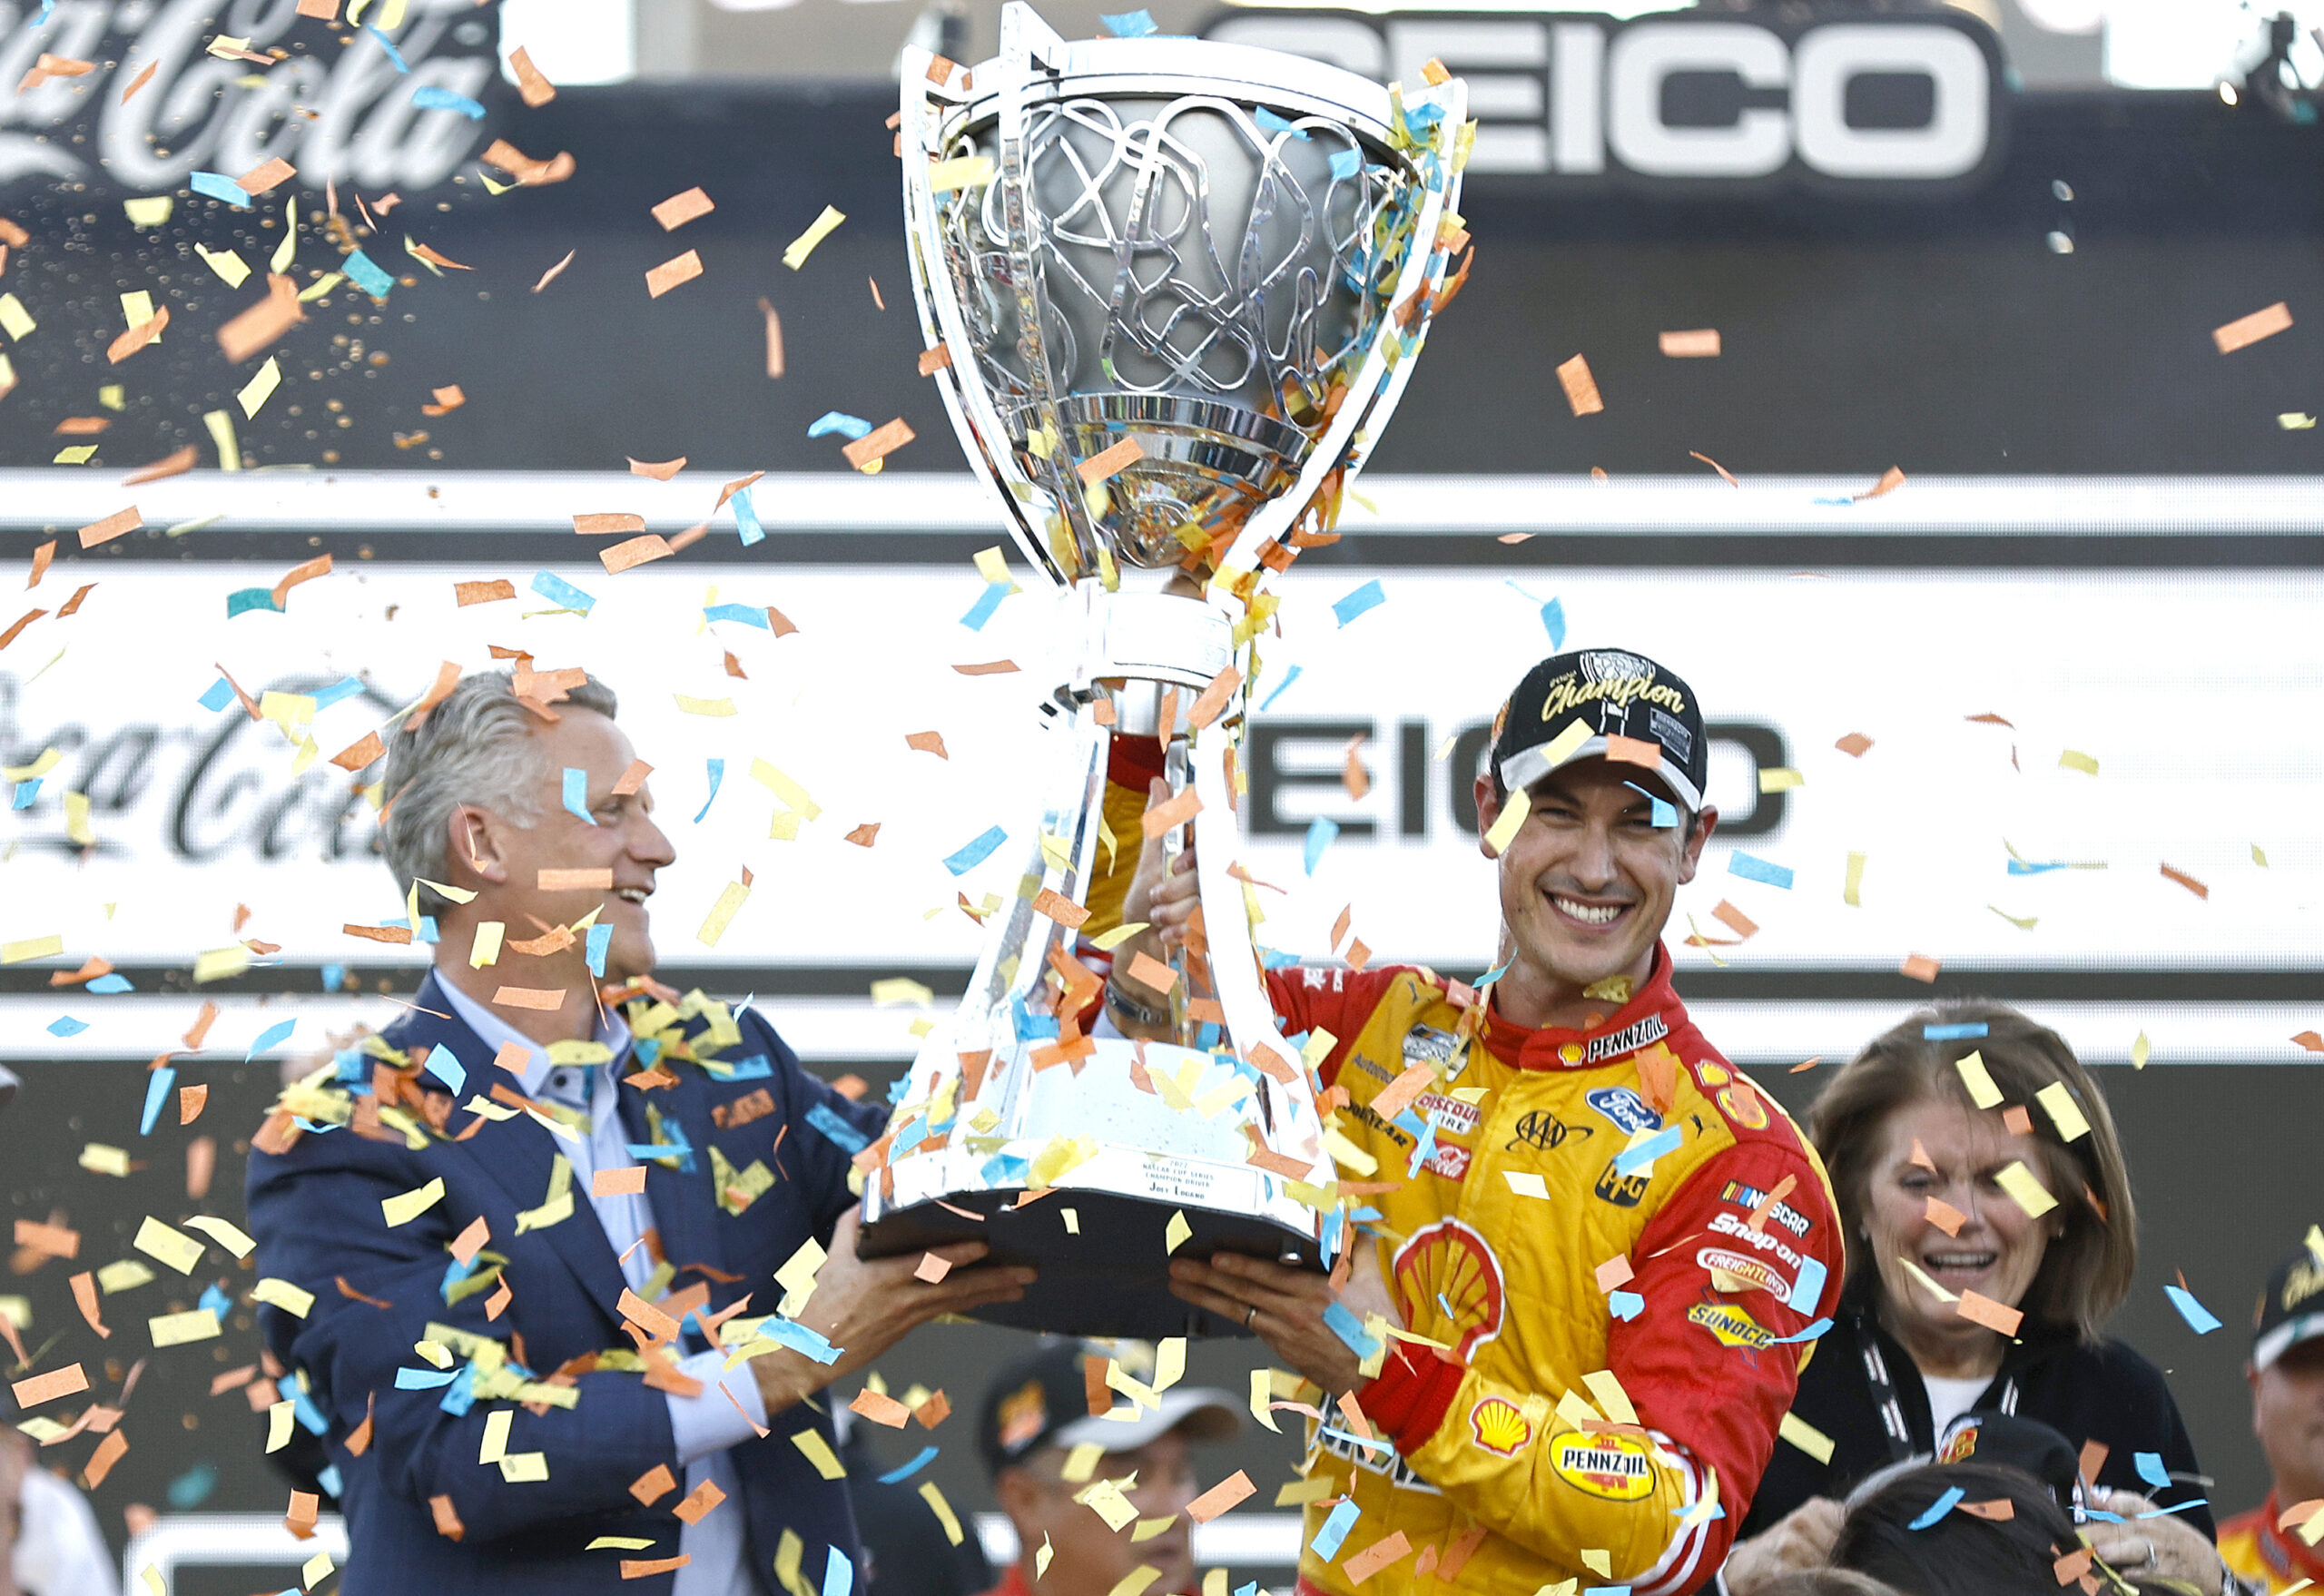 Joey Logano Takes Second Cup Series Championship